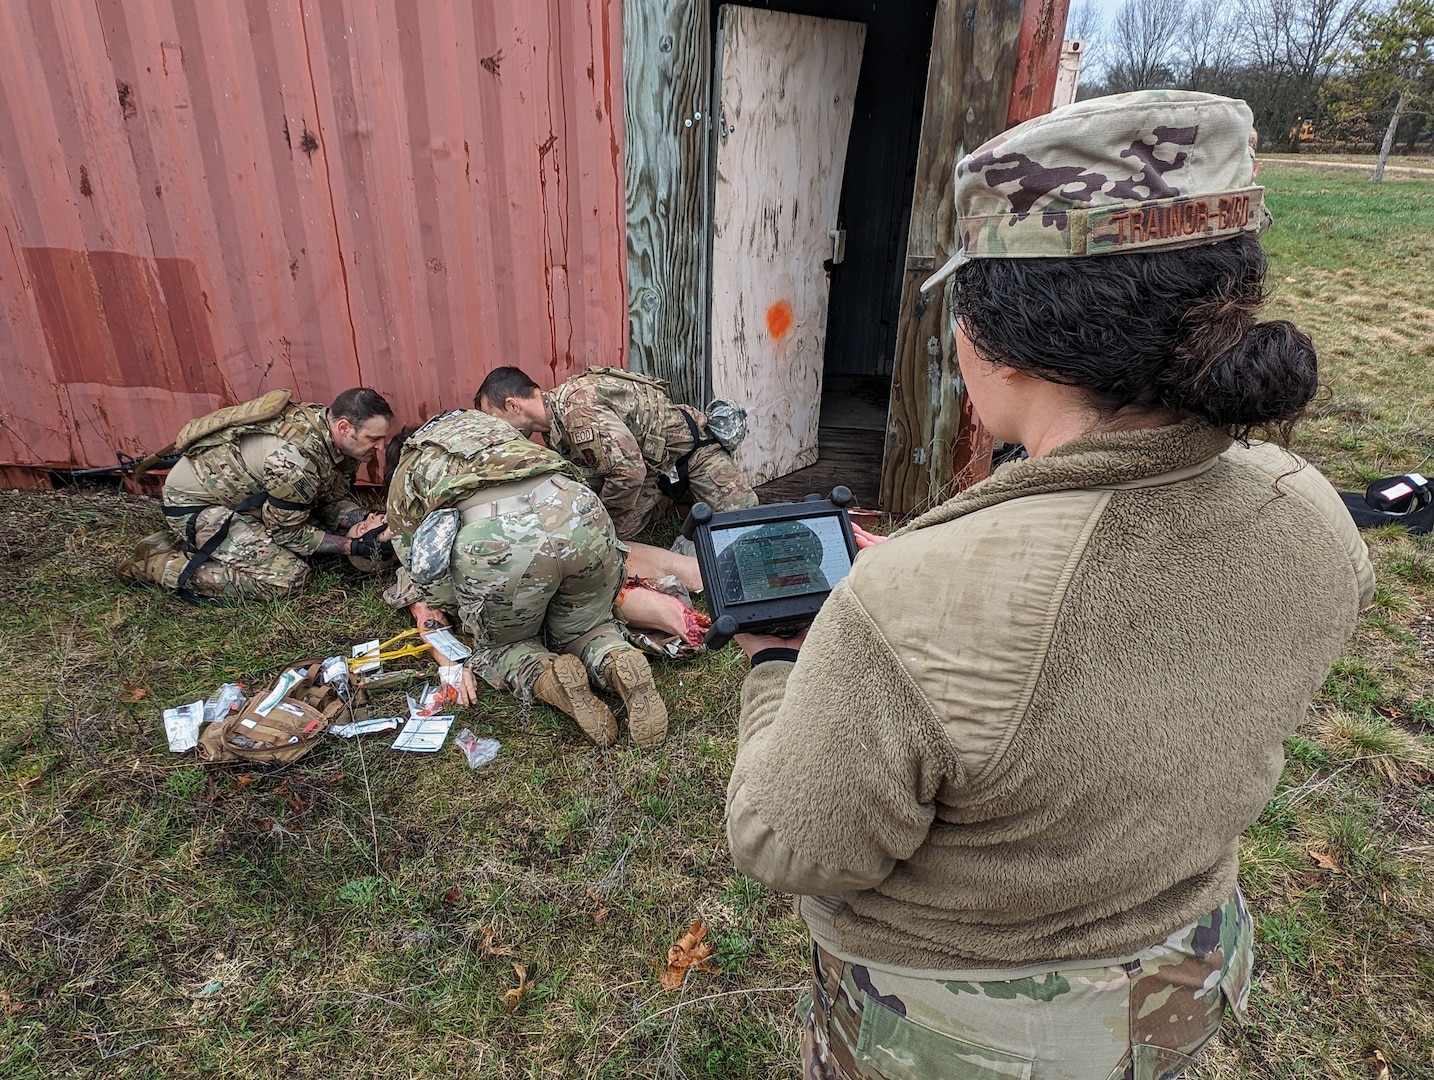 U.S. Air Force Tech. Sgt. Kailani Trainor-Bird, a medical specialist assigned to the Wisconsin Air National Guard's 115th Fighter Wing, remotely operates a tactical combat patient simulator during a tactical combat casualty care exercise April 18, 2024, at Volk Field Air National Guard Base near Camp Douglas, Wisconsin. The training exercise was part of a 40 hour Tactical Combat Casualty Care - Combat Life Savers Course administered by members of the 115th Medical Group to Airmen within the wing who's career fields require advanced lifesaving skills. (U.S. Air National Guard photo by Senior Master Sgt. Paul Gorman)